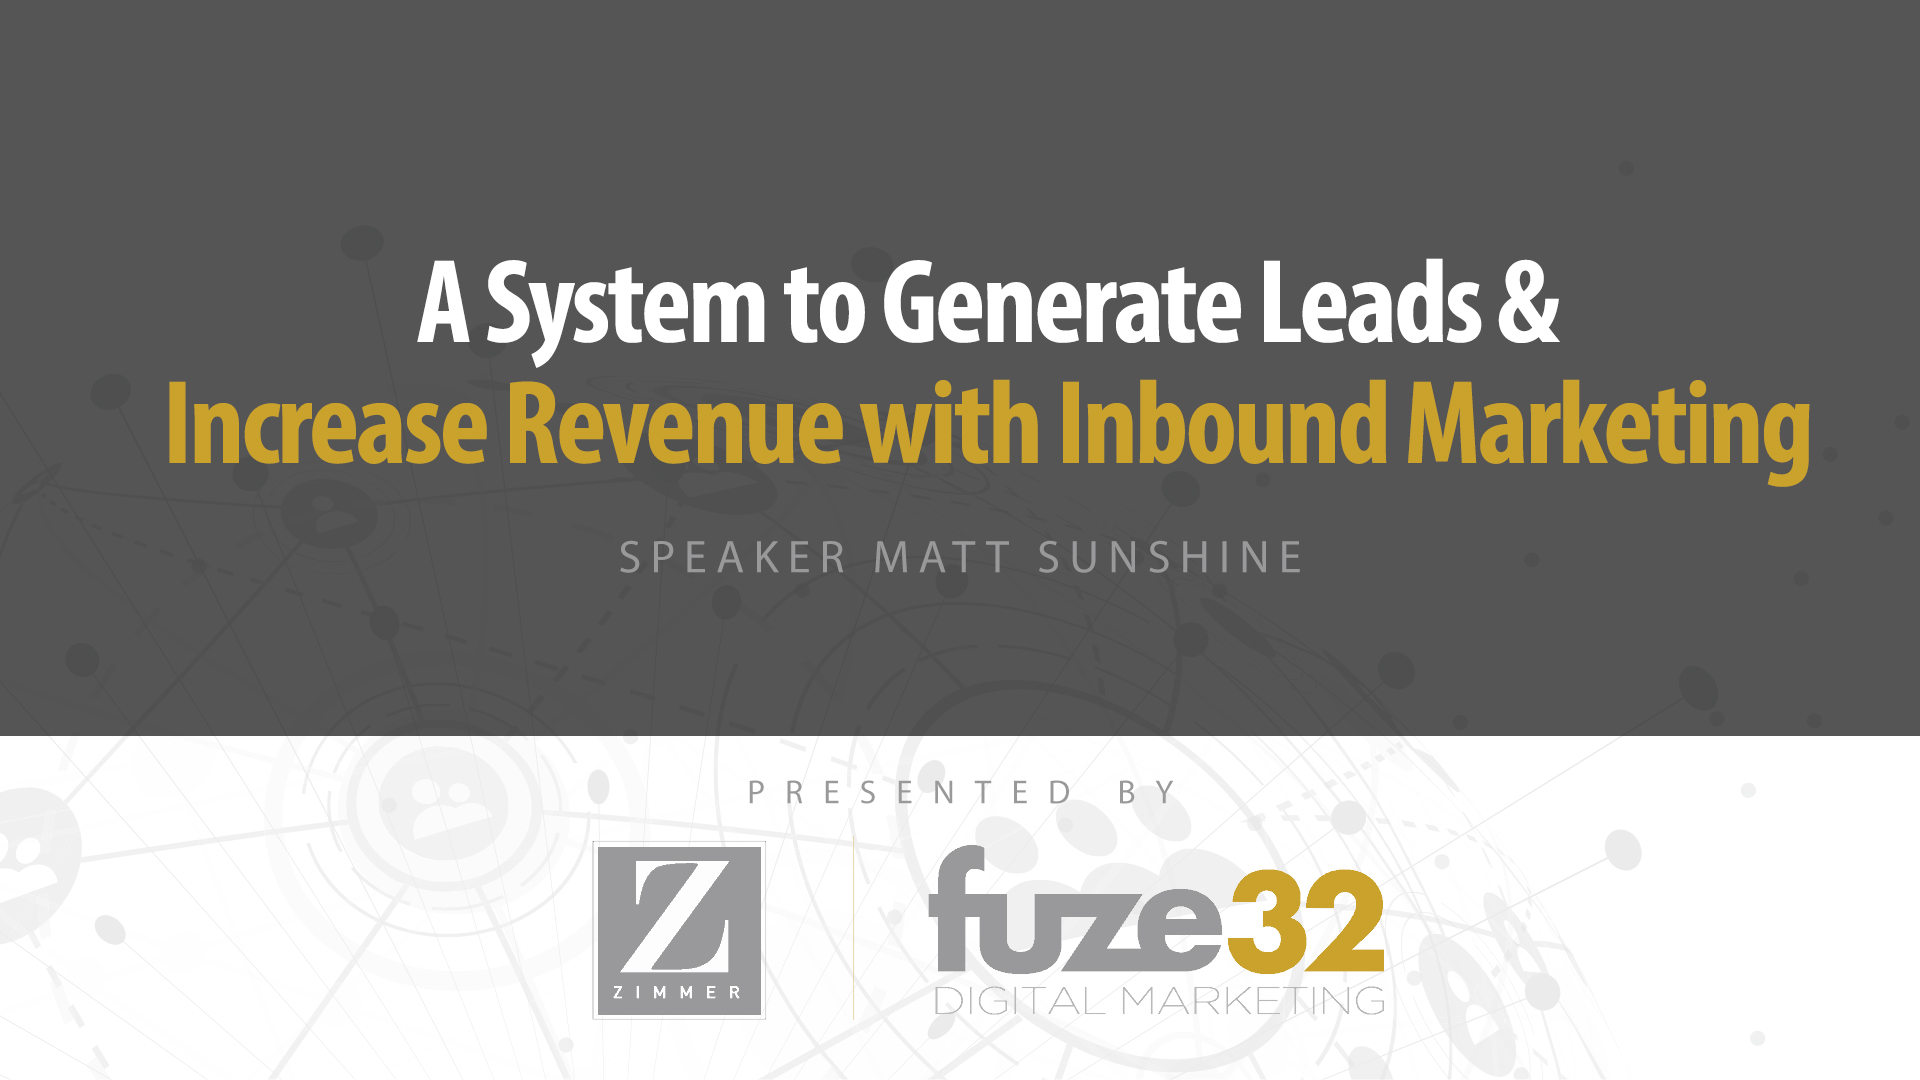 5-reasons-to-attend-our-inbound-seminar-a-system-to-generate-leads-and-increase-revenue-with-inbound-marketing